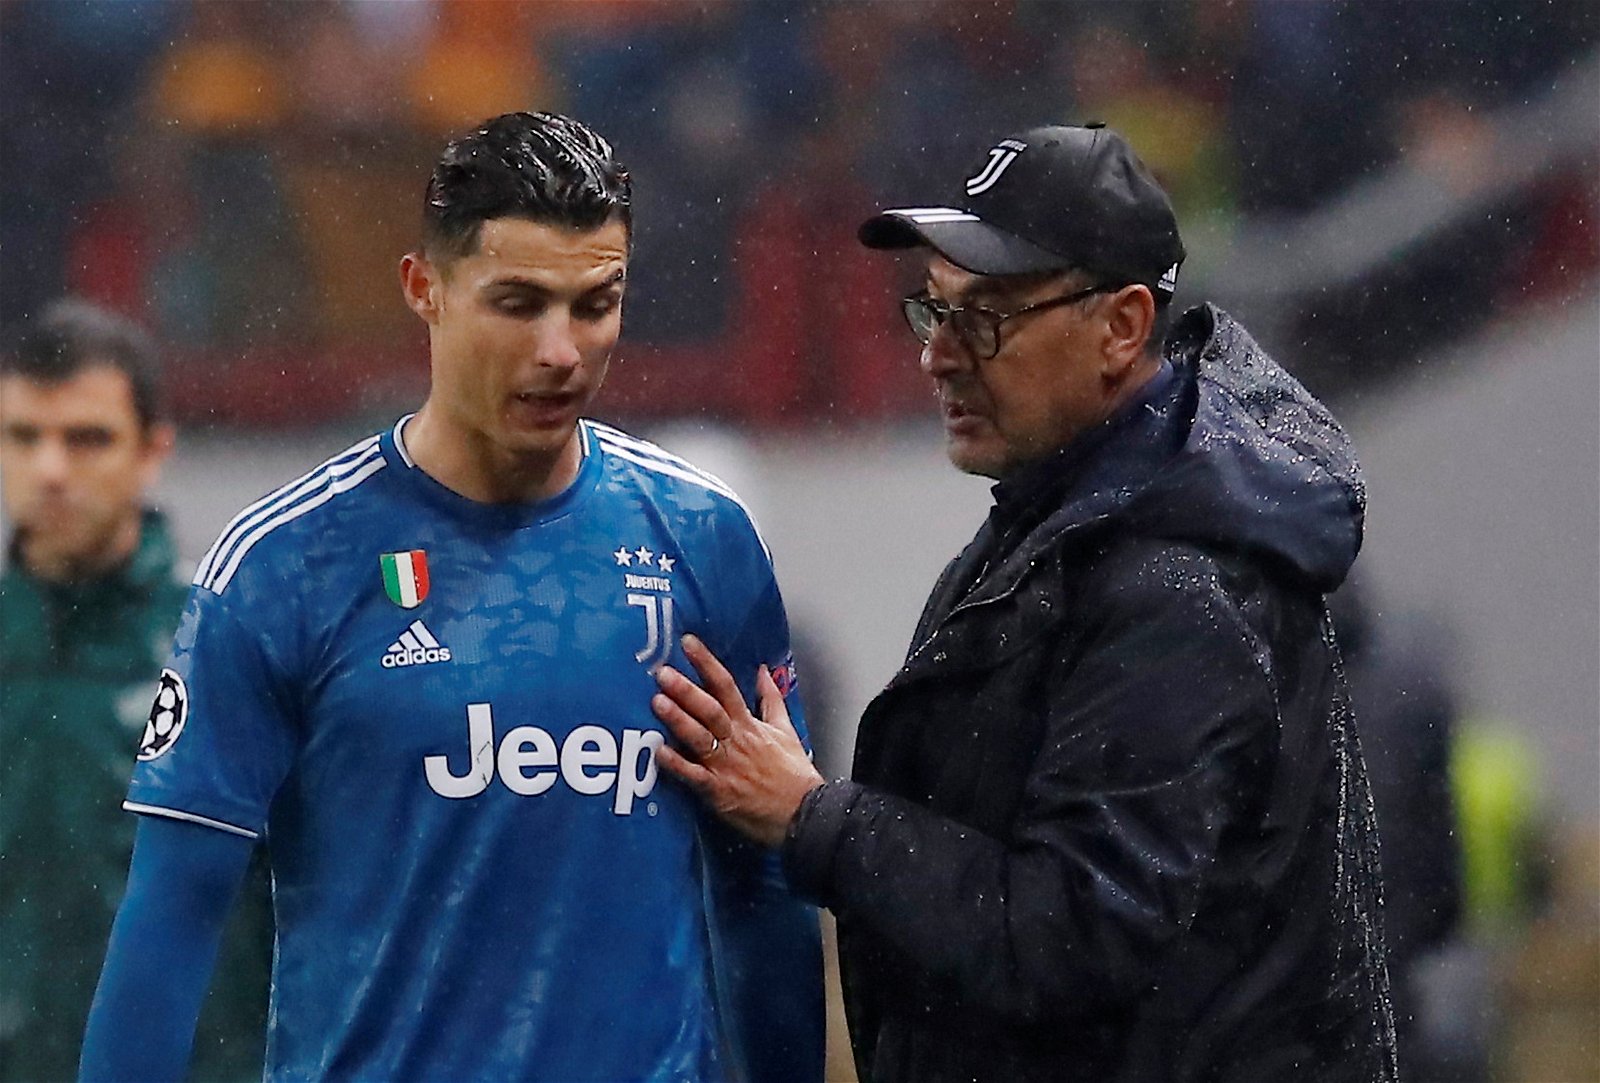 Frustrated Cristiano Ronaldo leaves stadium after substituted off against AC Milan